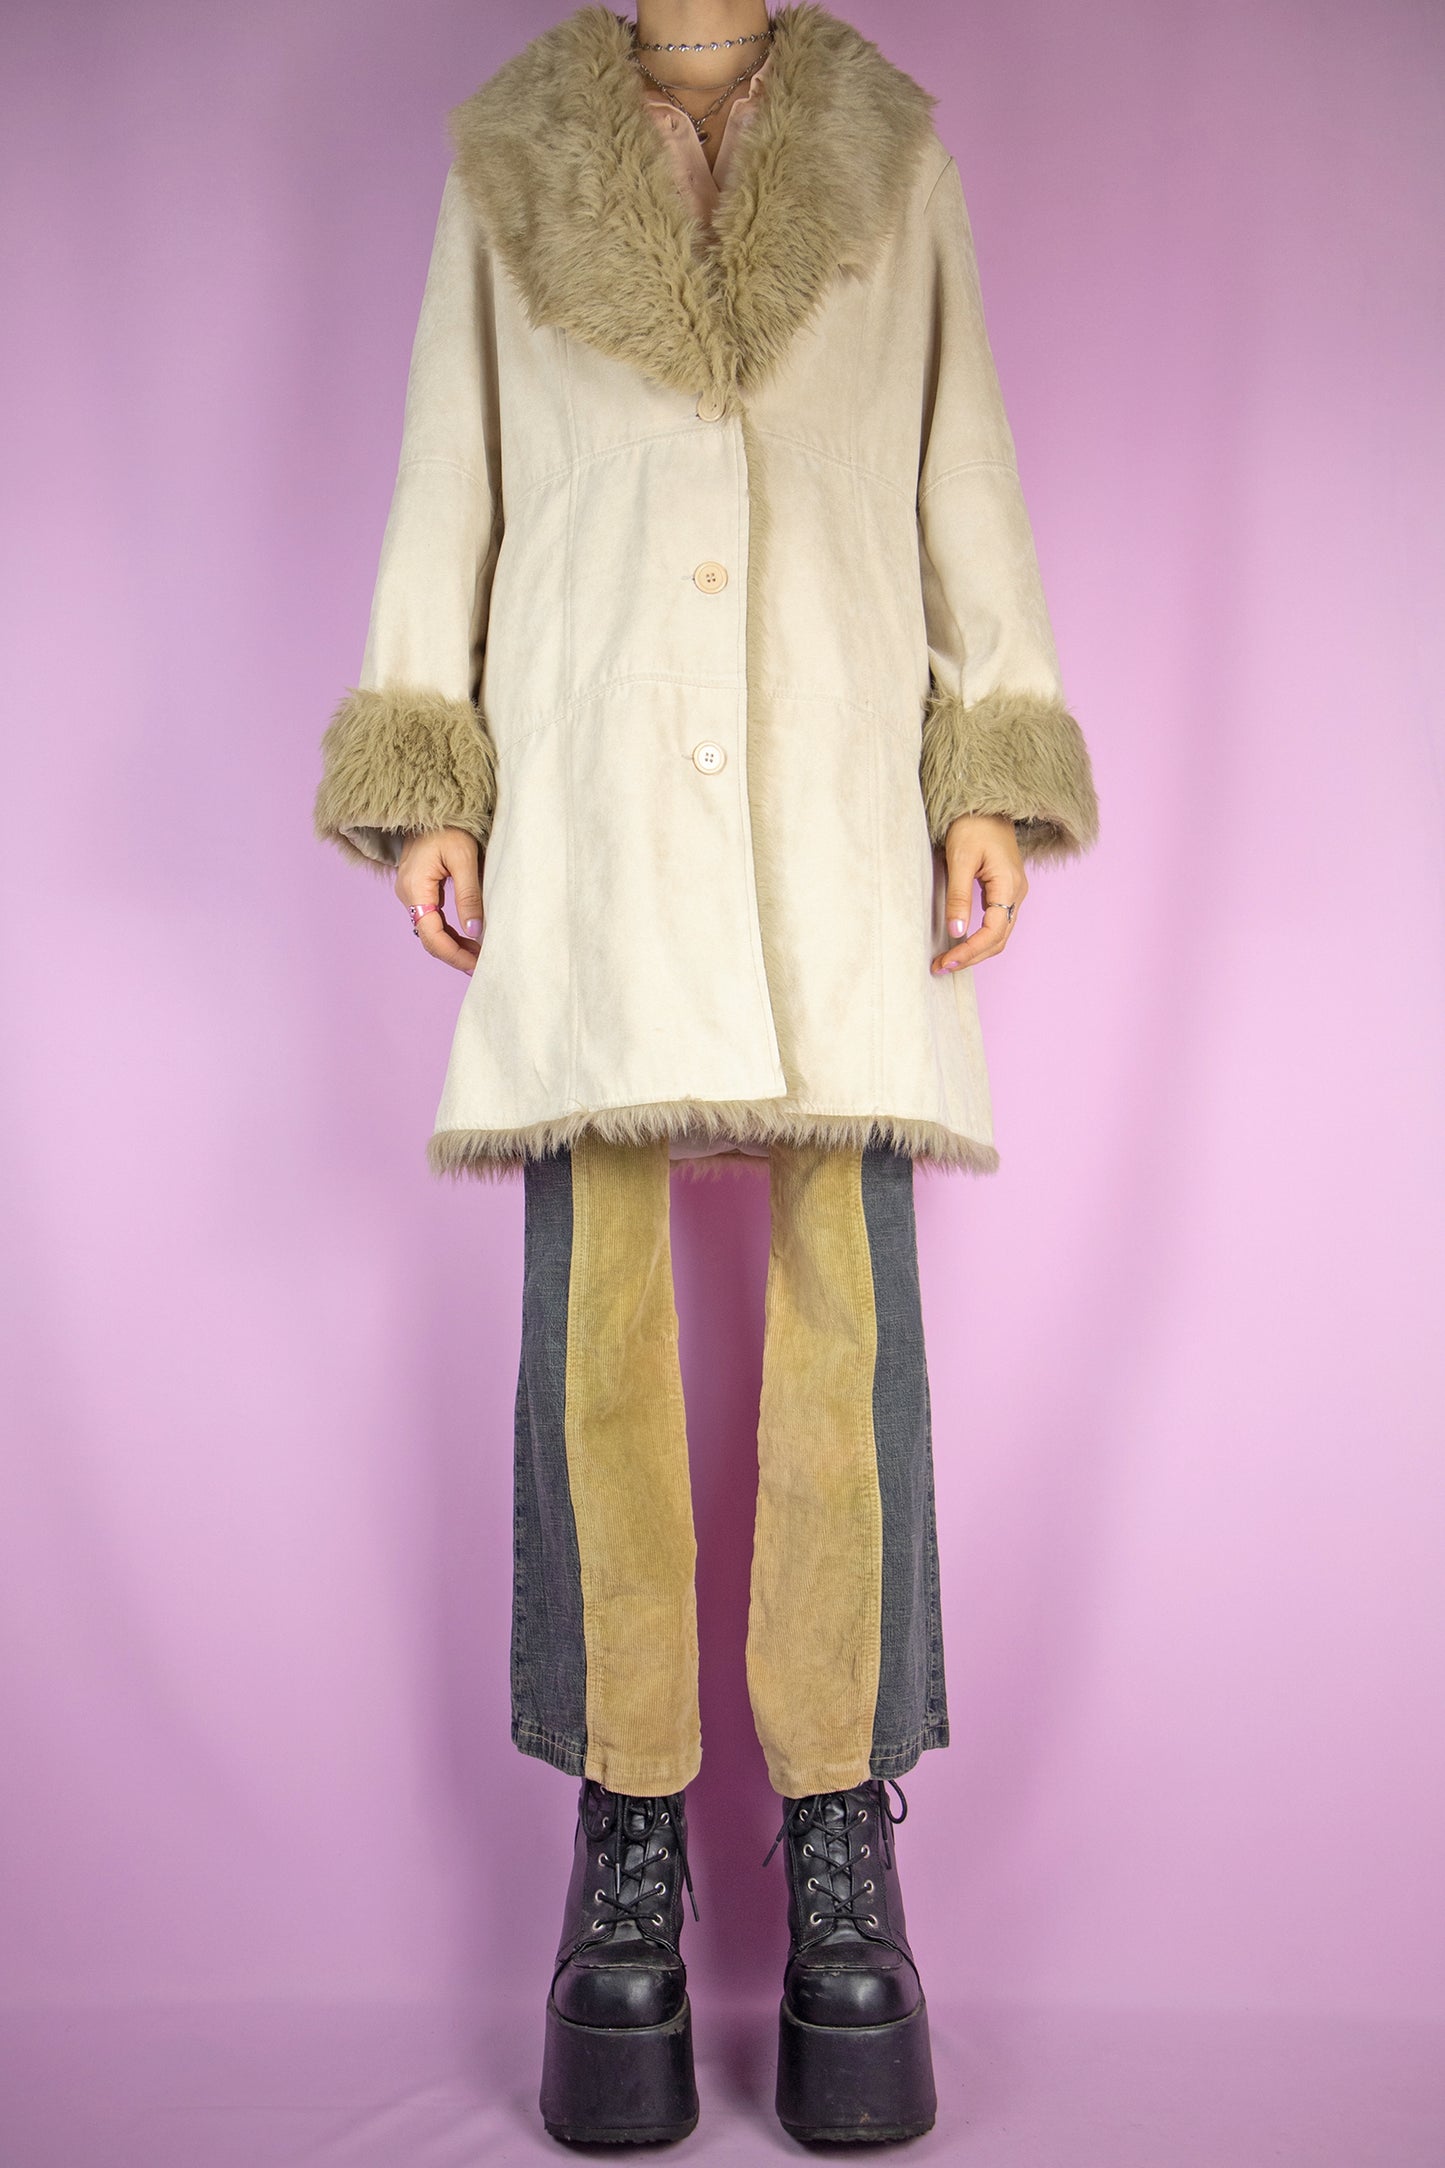 The Y2K Beige Penny Lane Coat is a vintage beige faux suede coat with light brown faux fur collar and cuffs, button closure and pockets. Iconic cyber afghan style 2000s winter statement jacket.